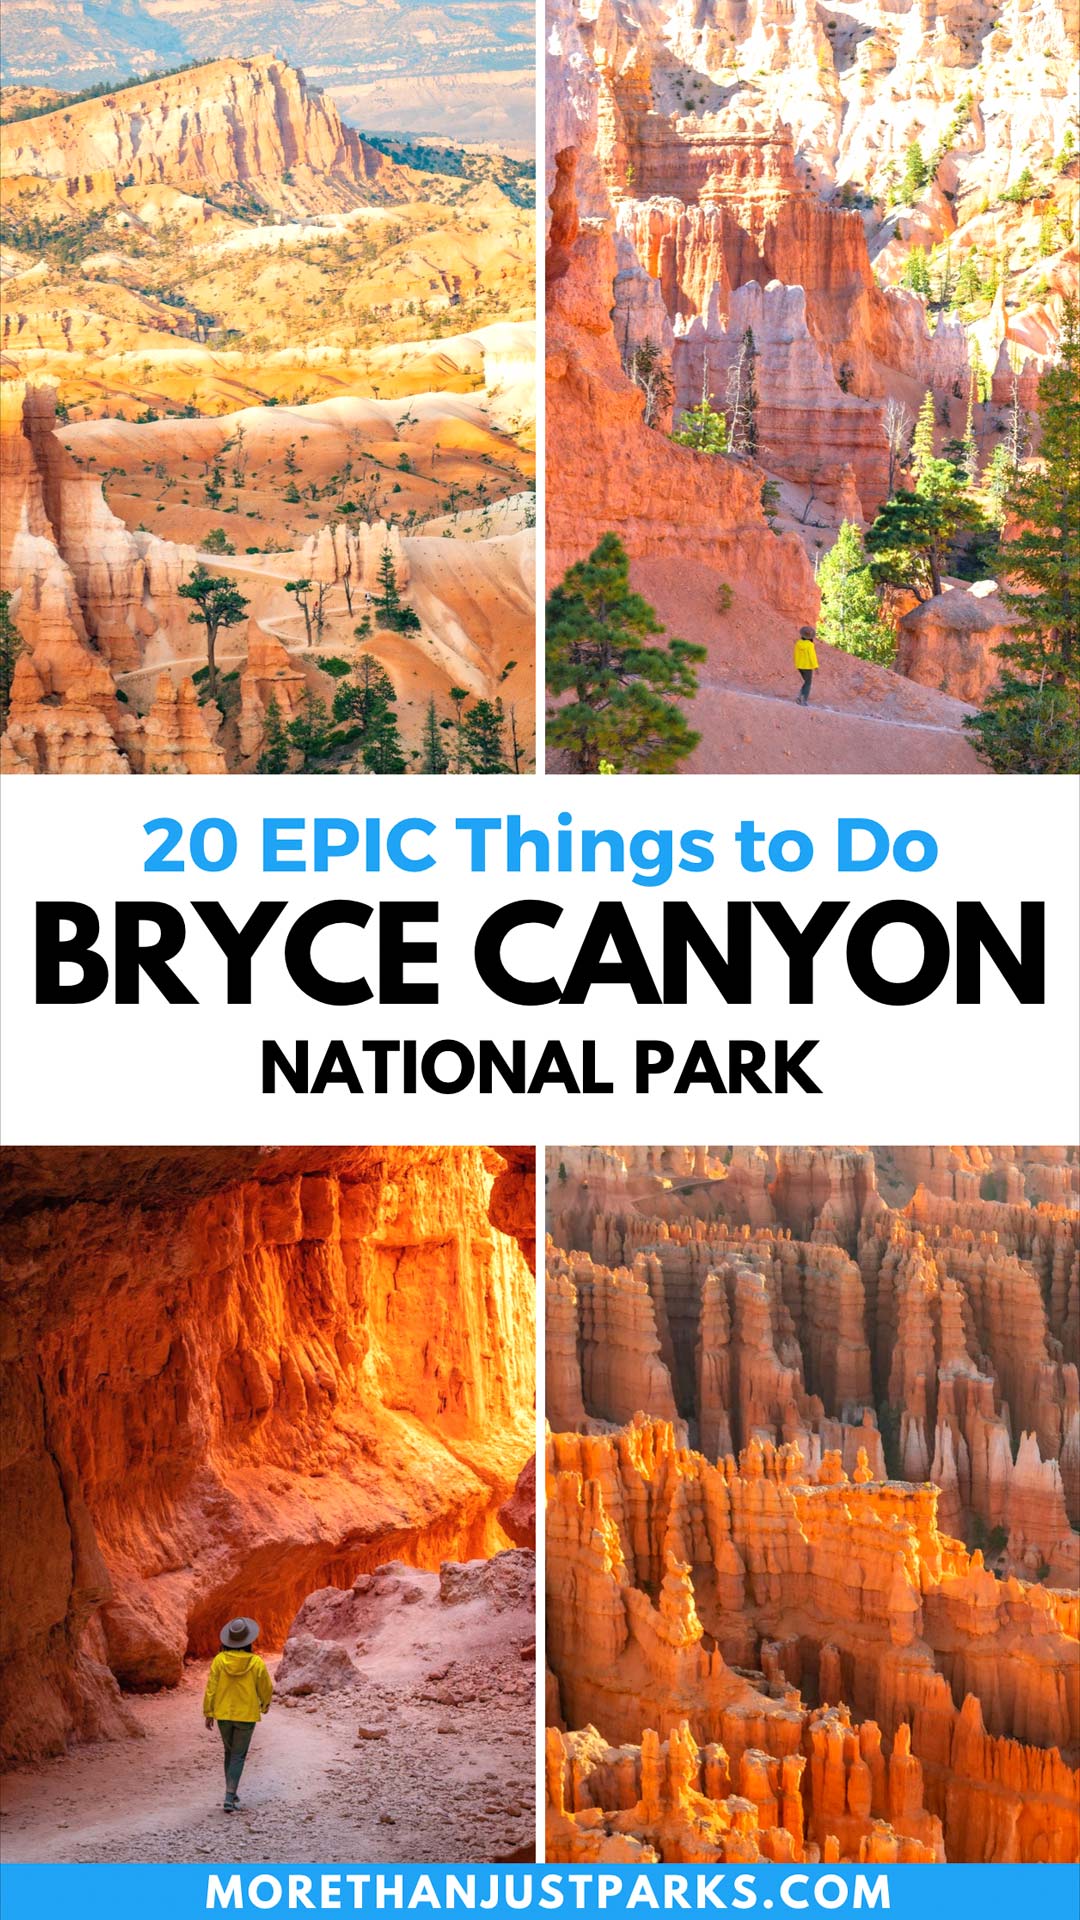 things to do bryce canyon national park, bryce canyon national park activities utah